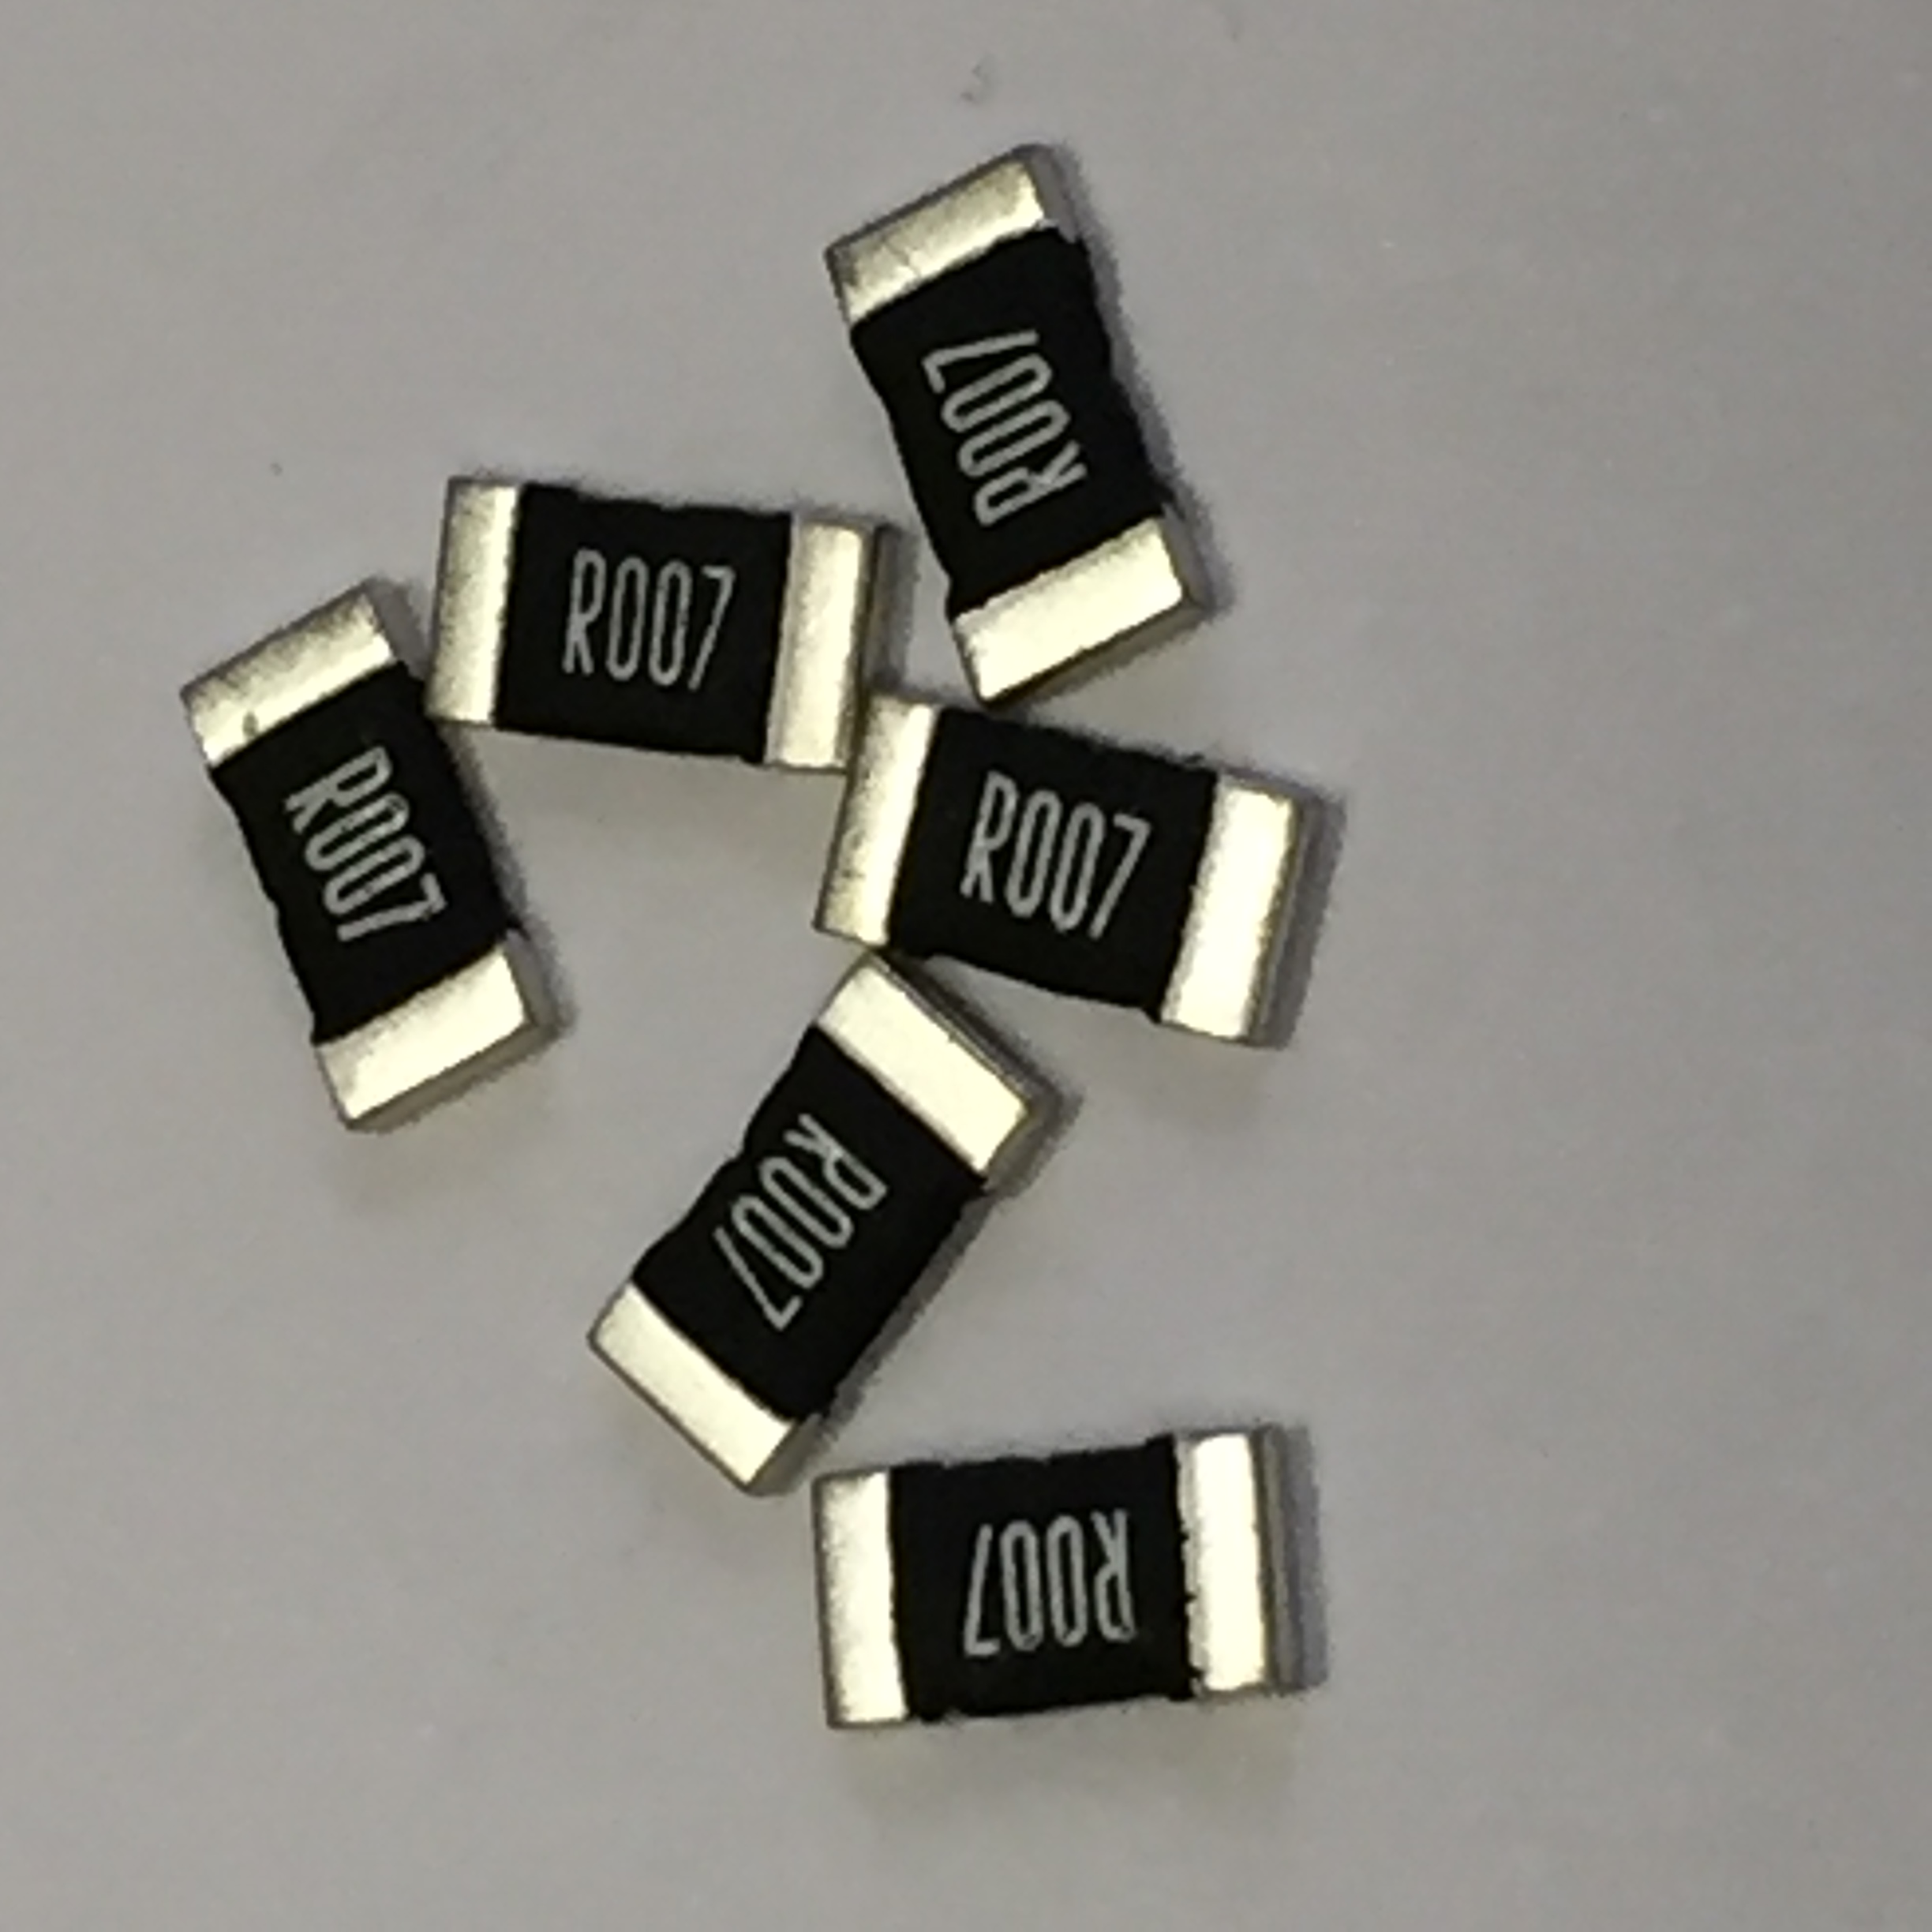 Current Sense Chips Offer Tolerances as Tight as 0.5%